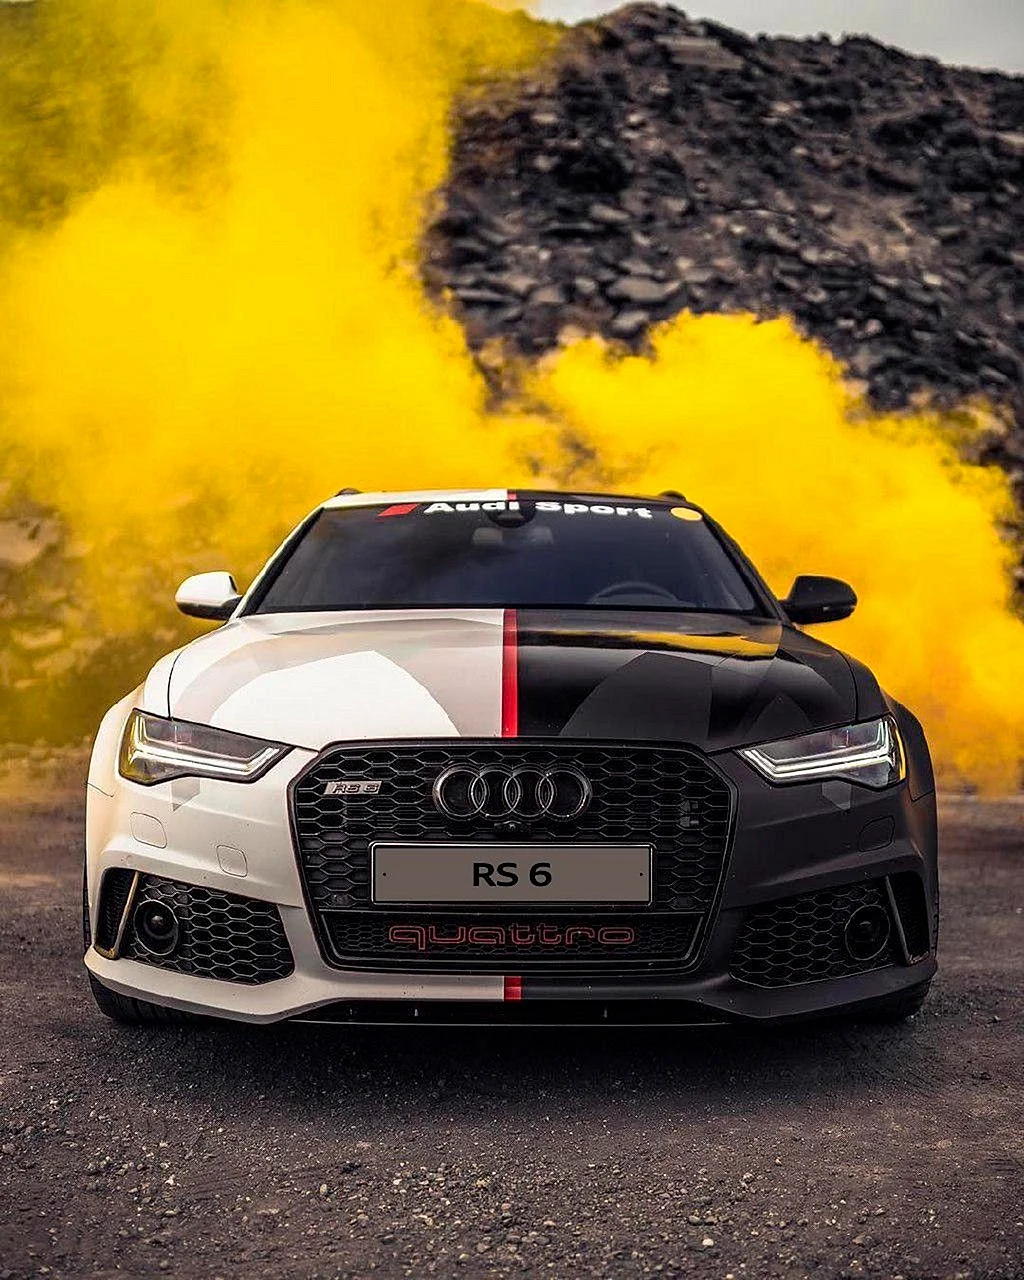 Audi Rs6 Wallpaper For iPhone